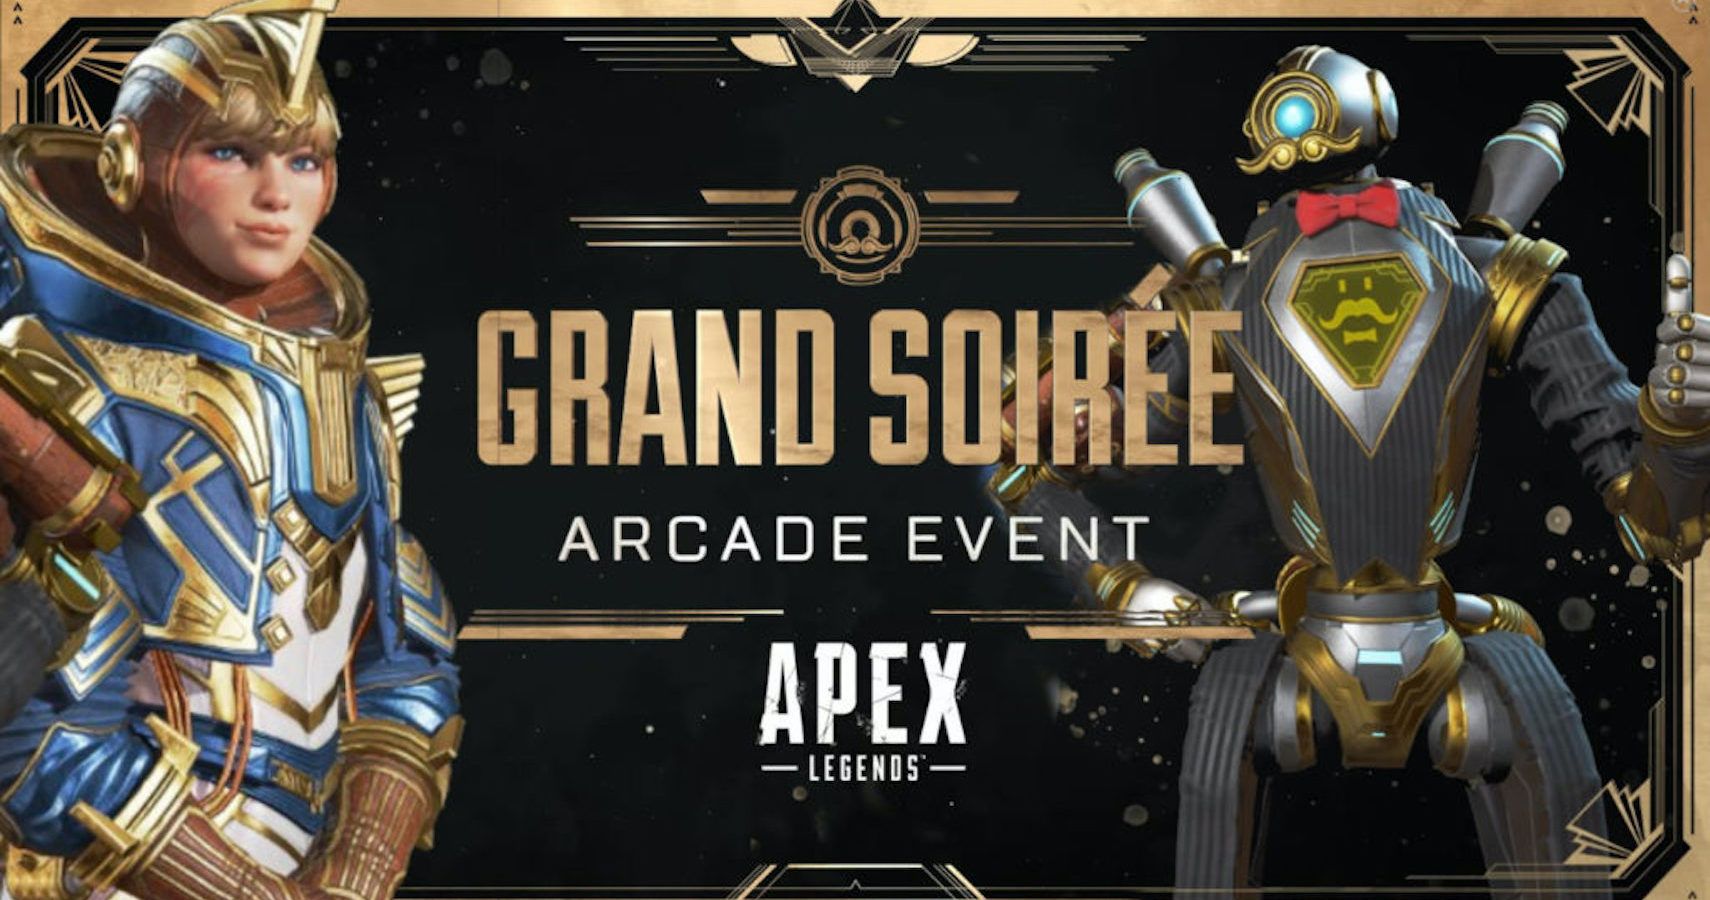 Everything You Need To Know About The Apex Legends Grand Soiree Arcade